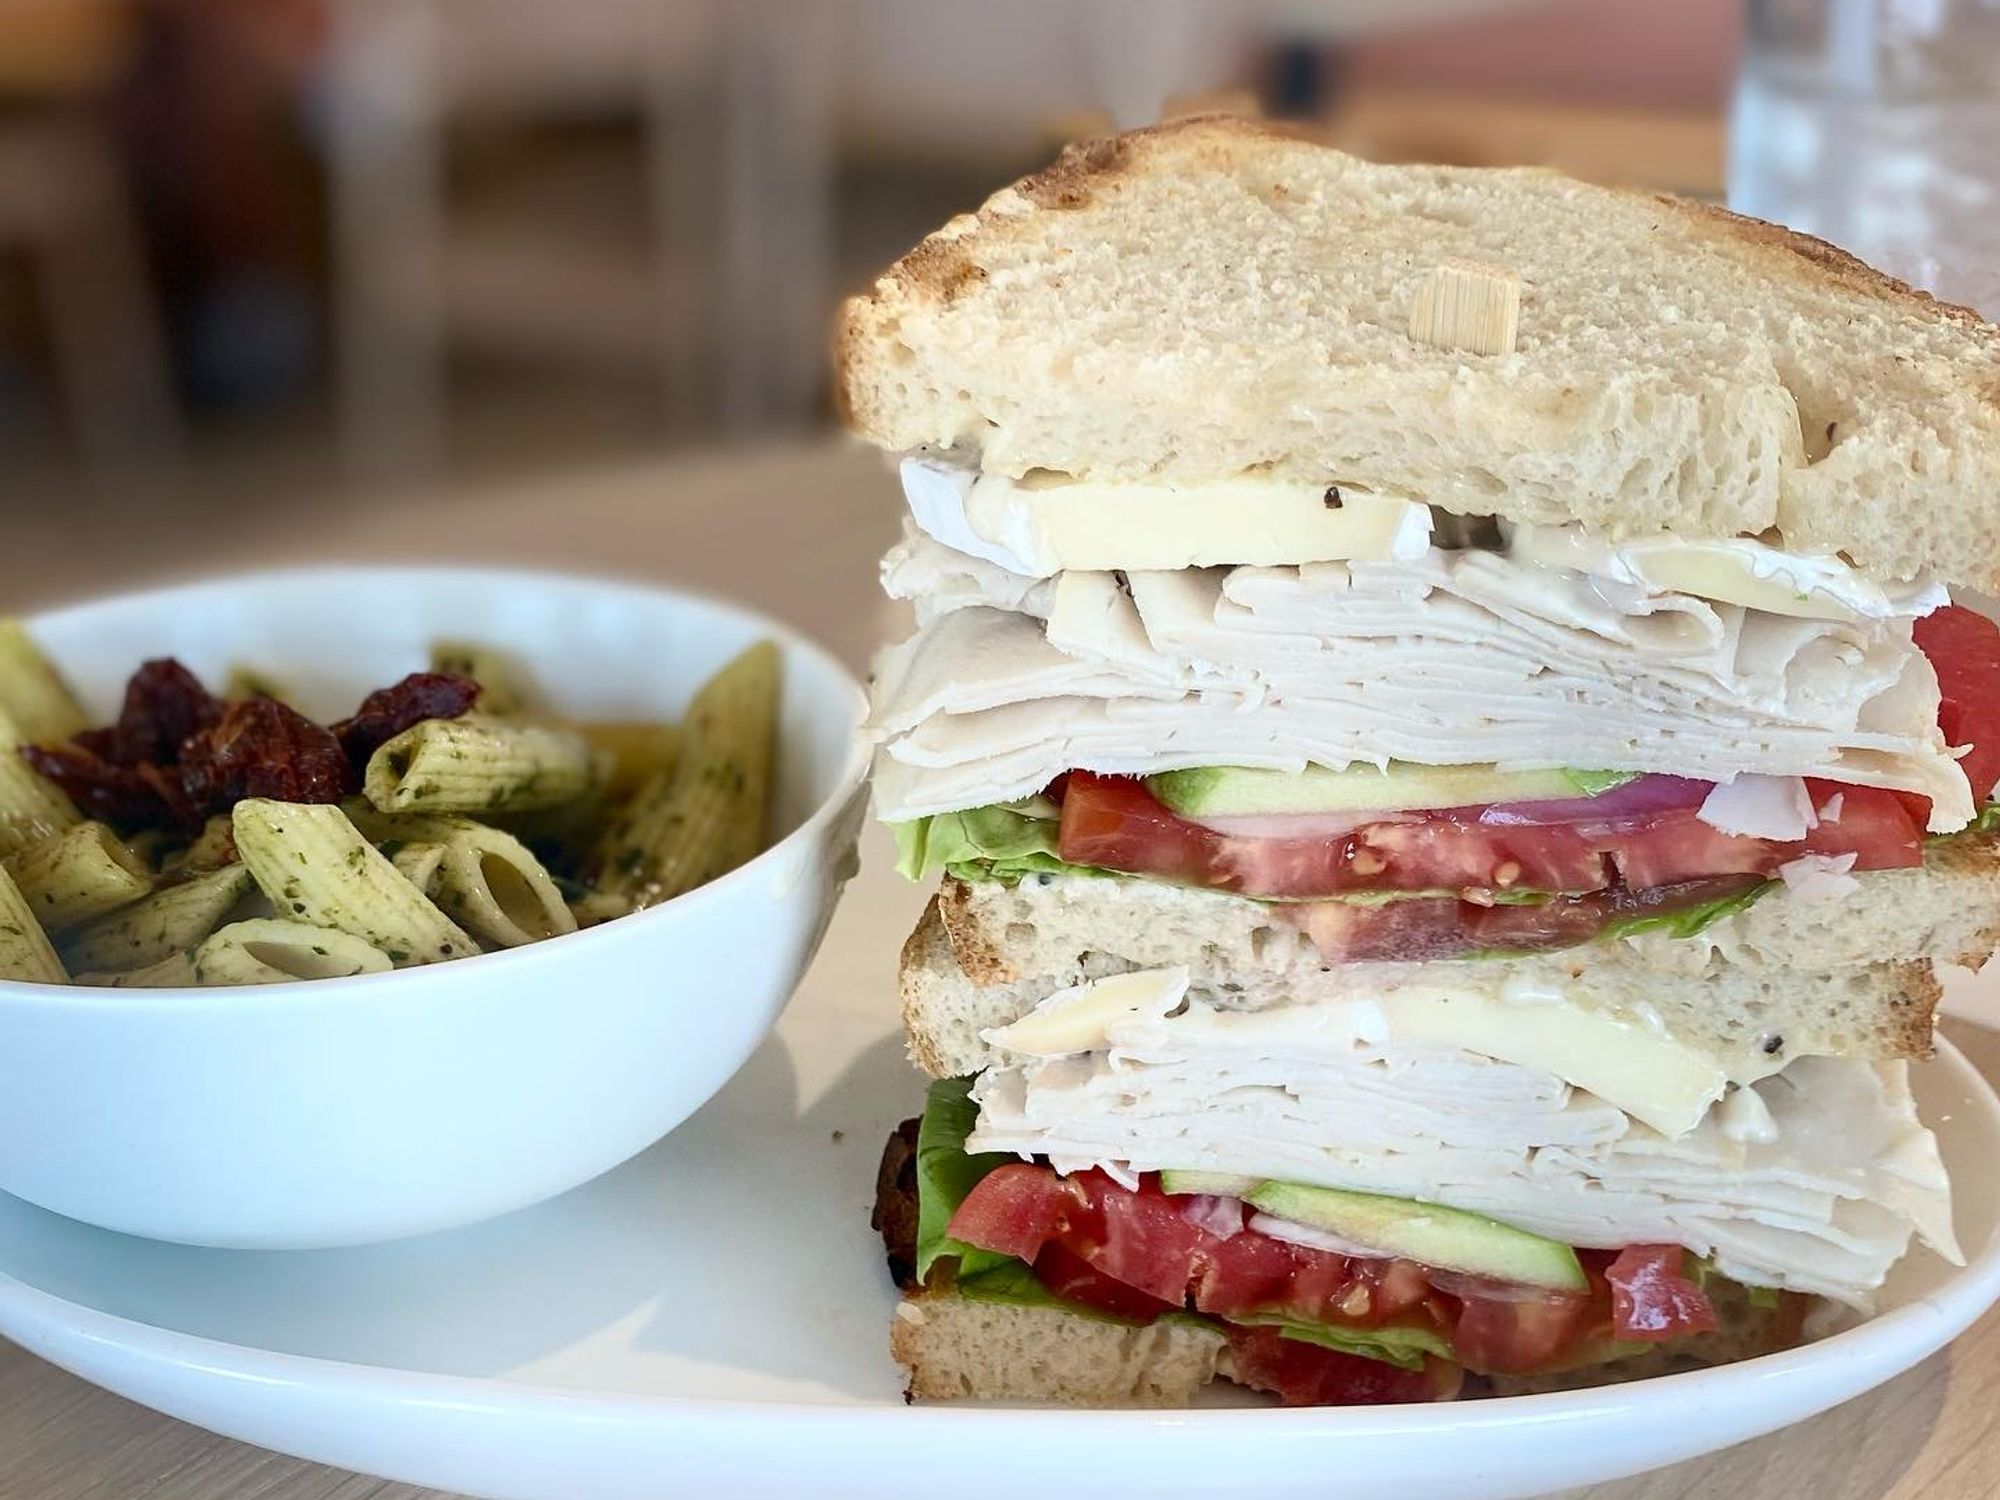 Zest Cafe in Dallas' Snider Plaza has perfect combo: good + affordable food  - CultureMap Dallas